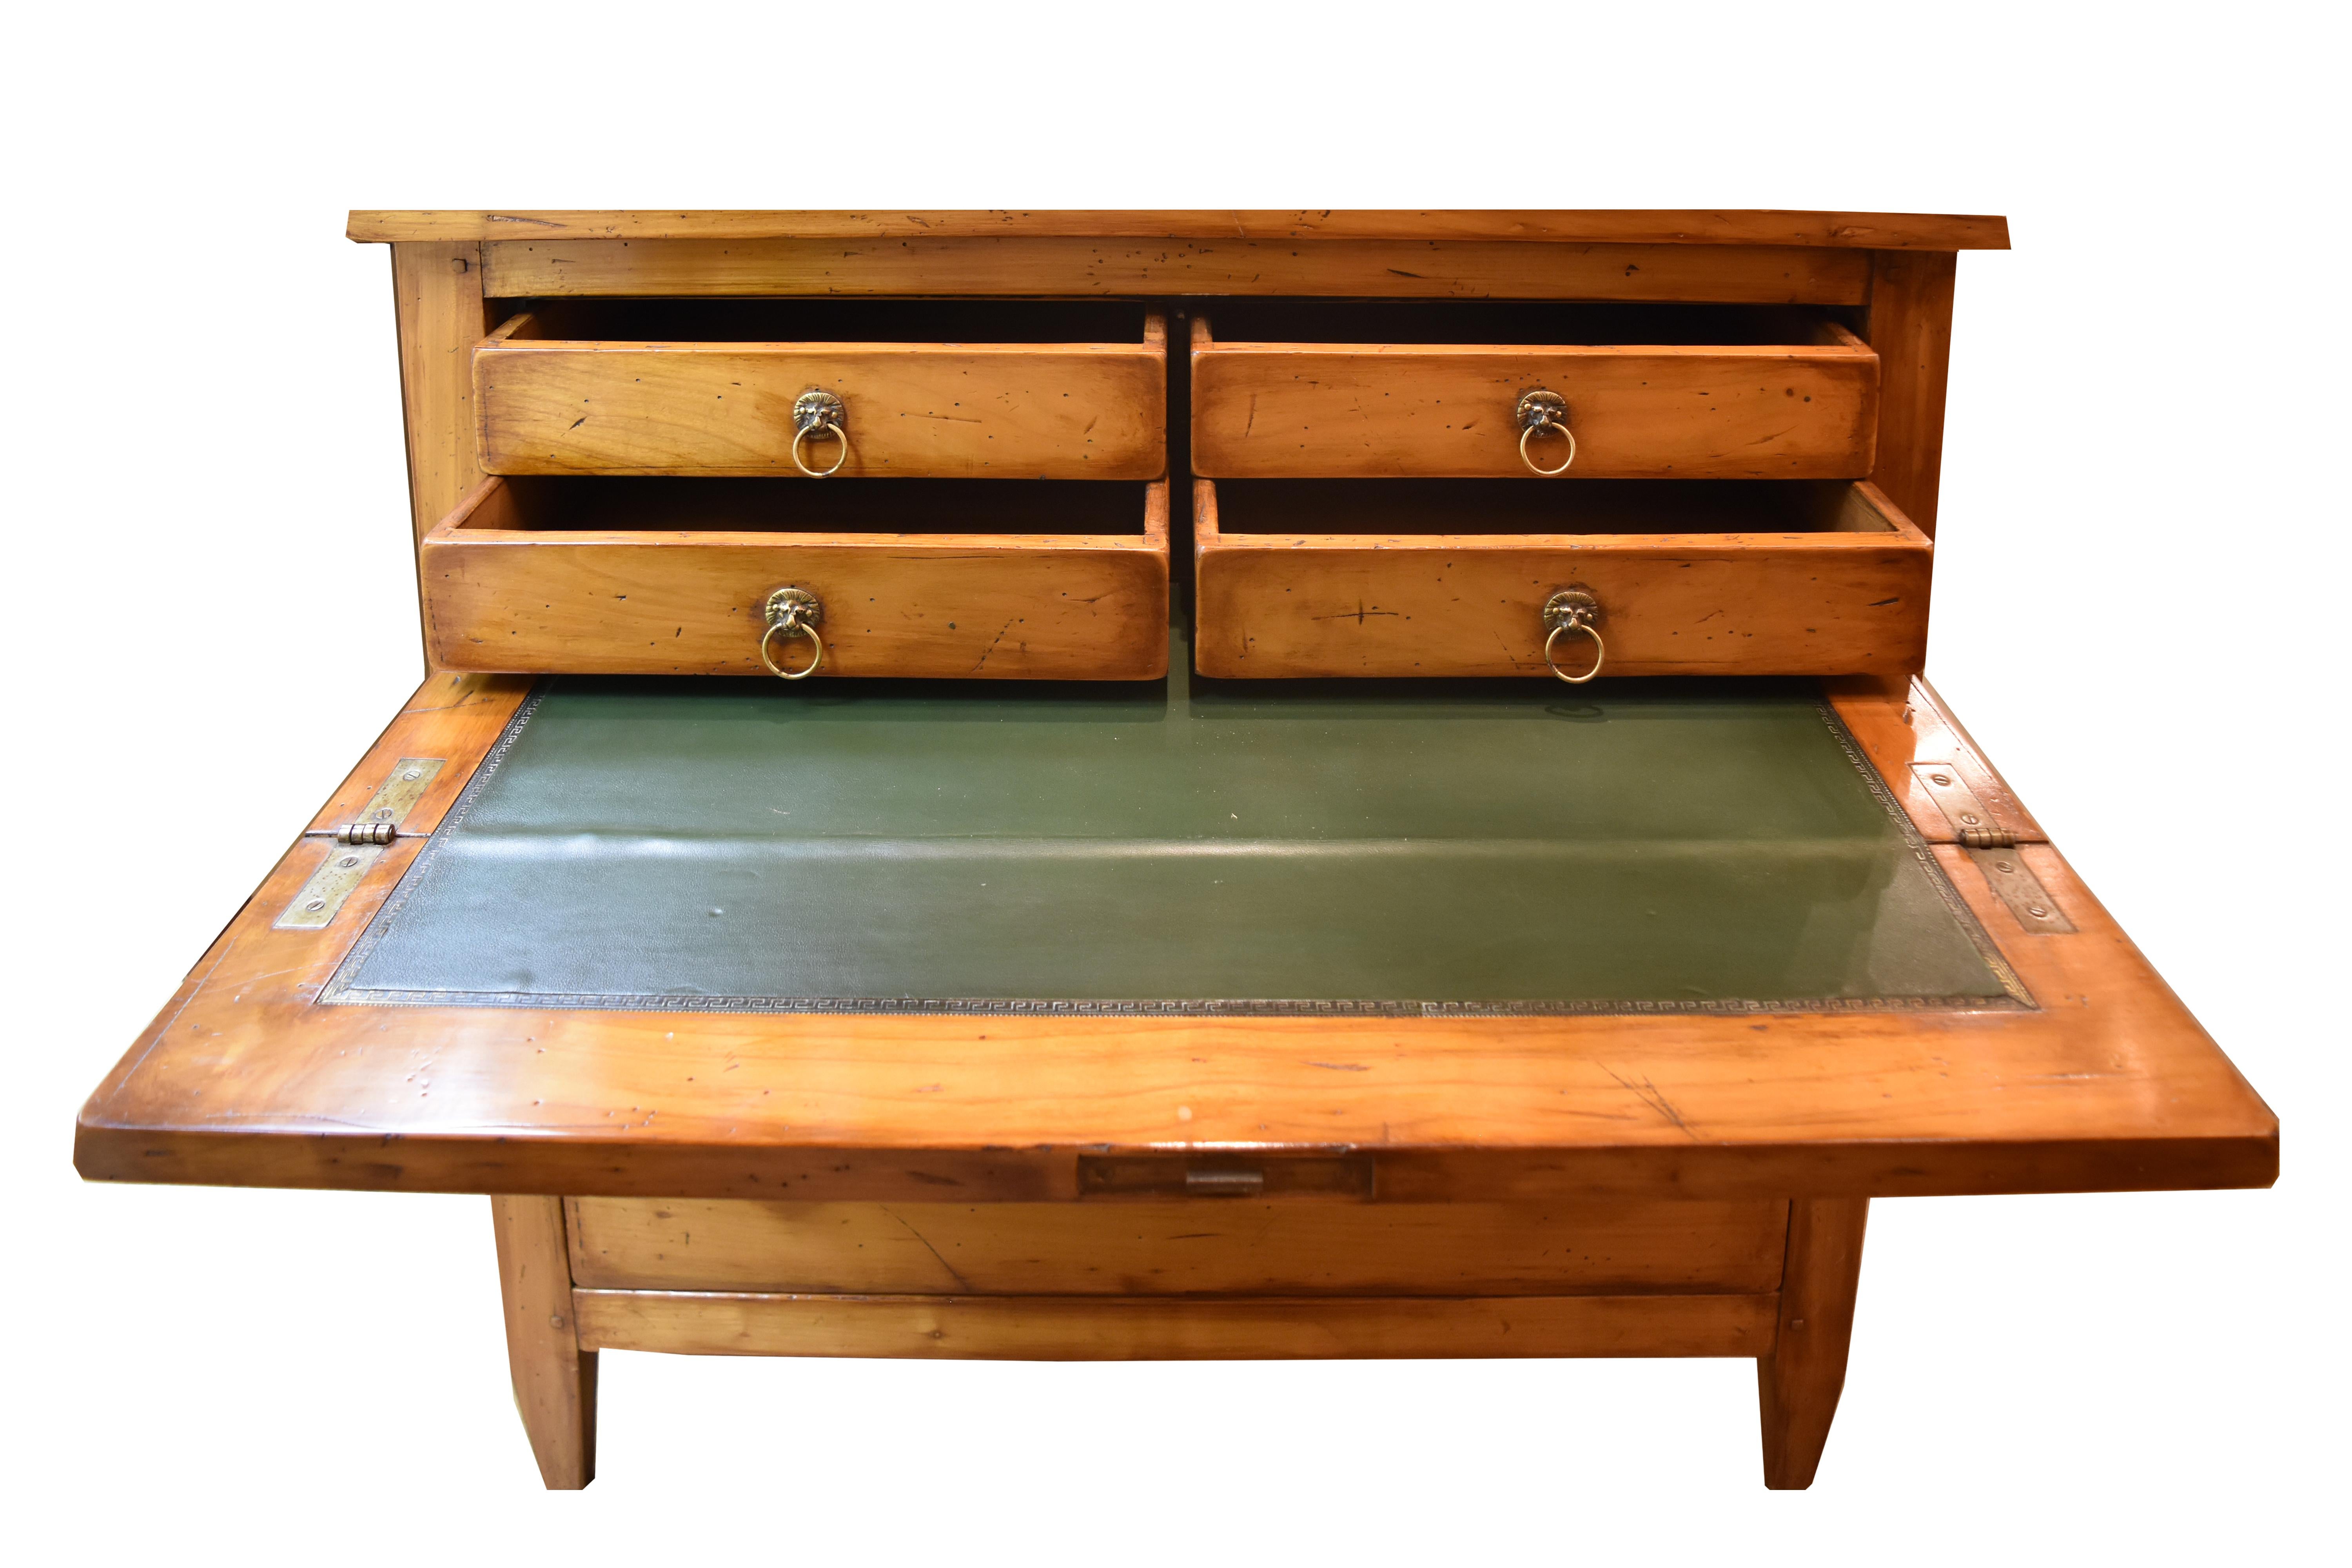 This 19th century narrow French Secretaire features a top drawer which opens to reveal a desk and four operable drawers. The Secretaire writing surface is green leather. The middle drawer is actually a cabinet and is hinged from the bottom. The only